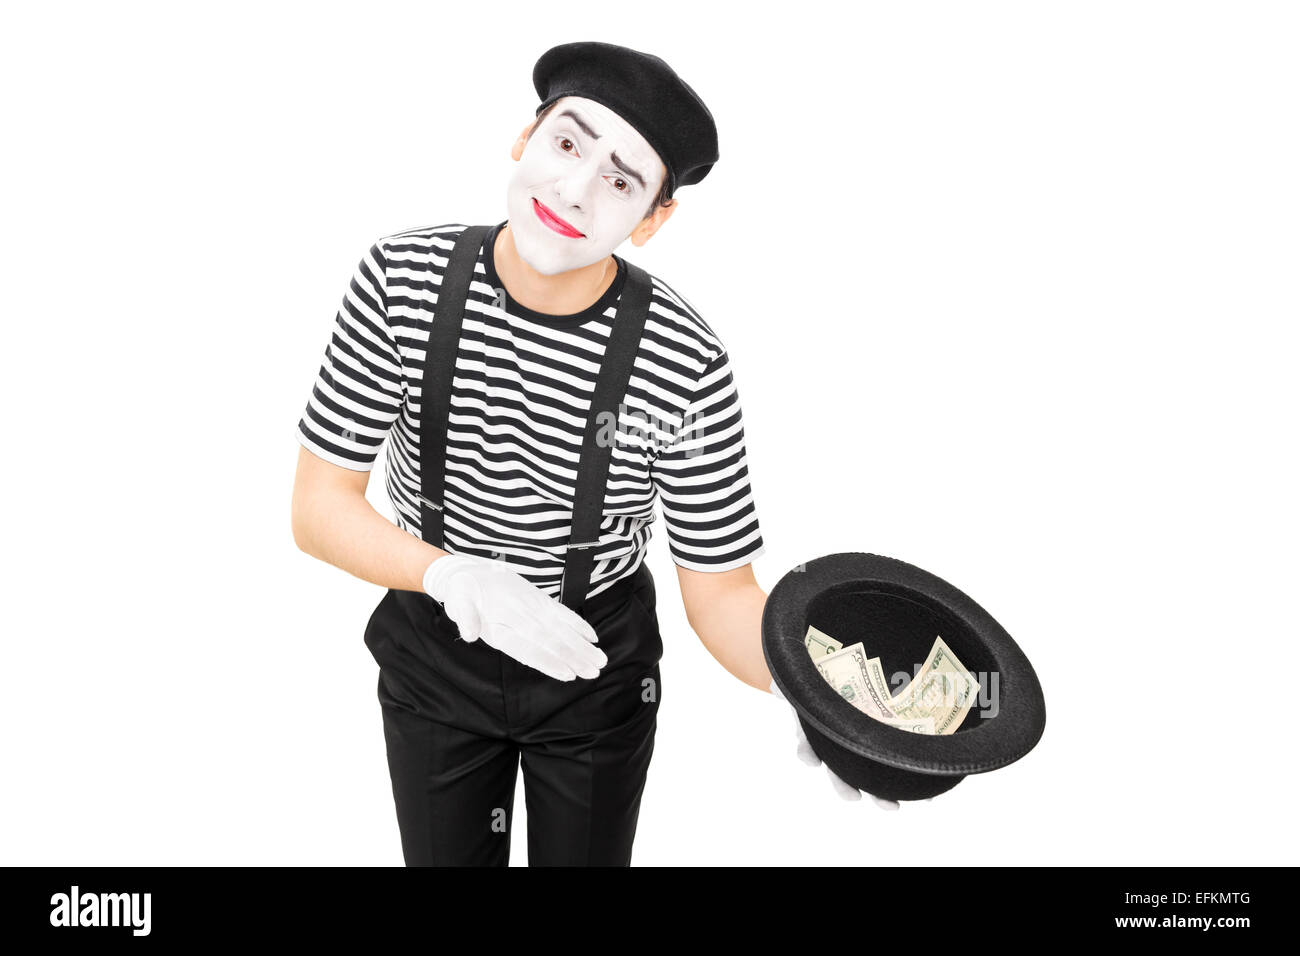 mime-artist-collecting-money-in-a-hat-isolated-on-white-background-EFKMTG.jpg